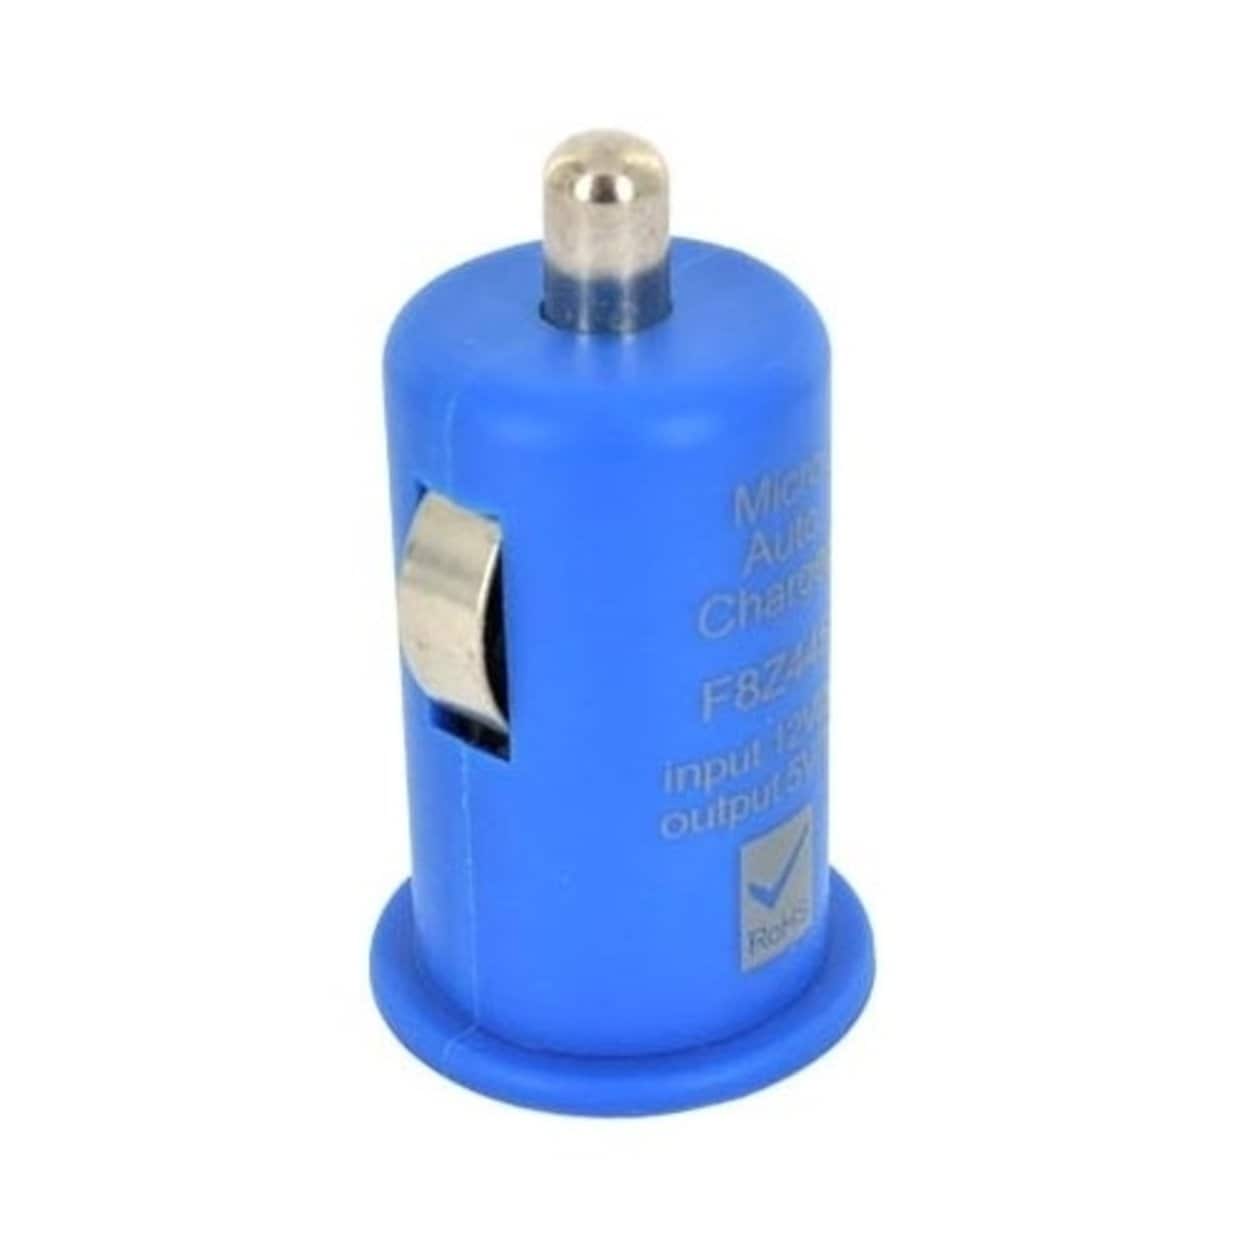 low profile usb car charger